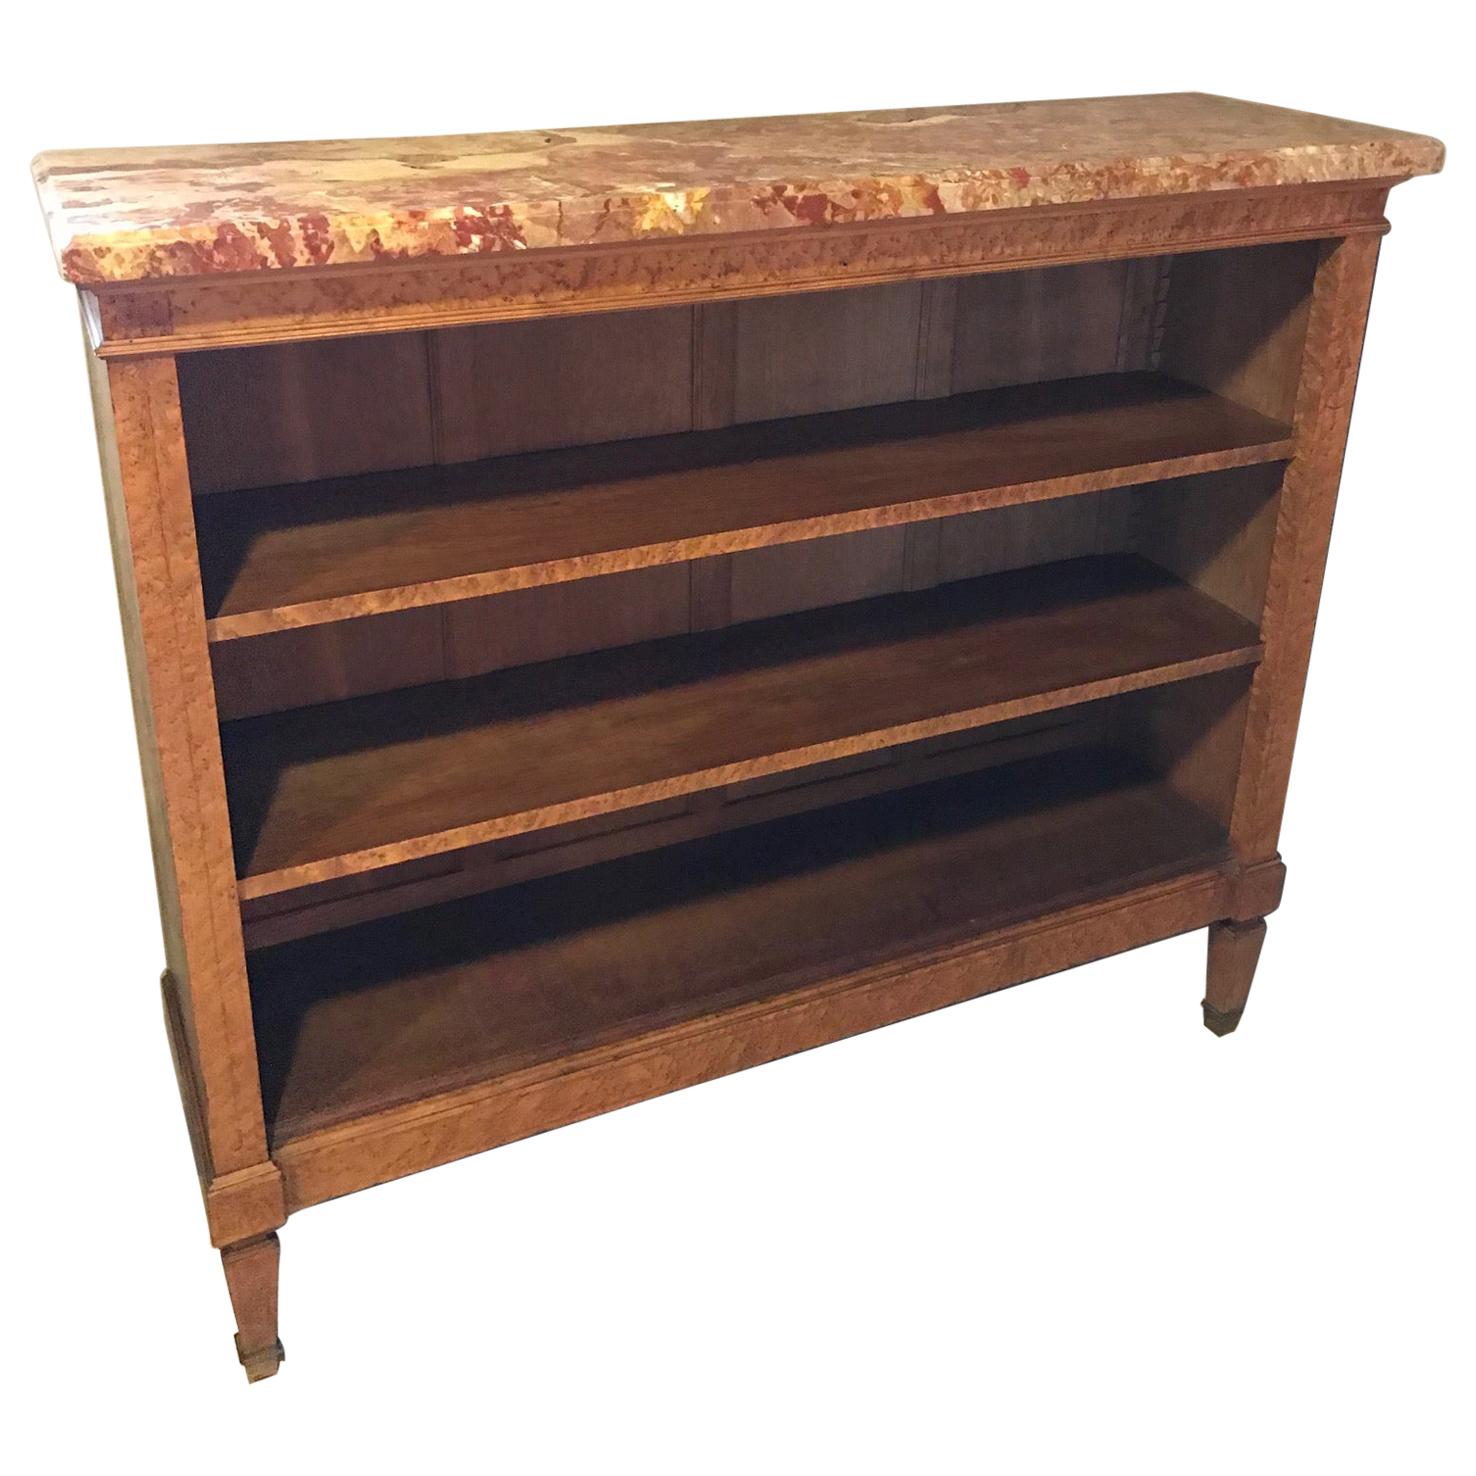 Early 20th Century French Sycamore Veneer and Marble Top Bibliotheque, 1920s